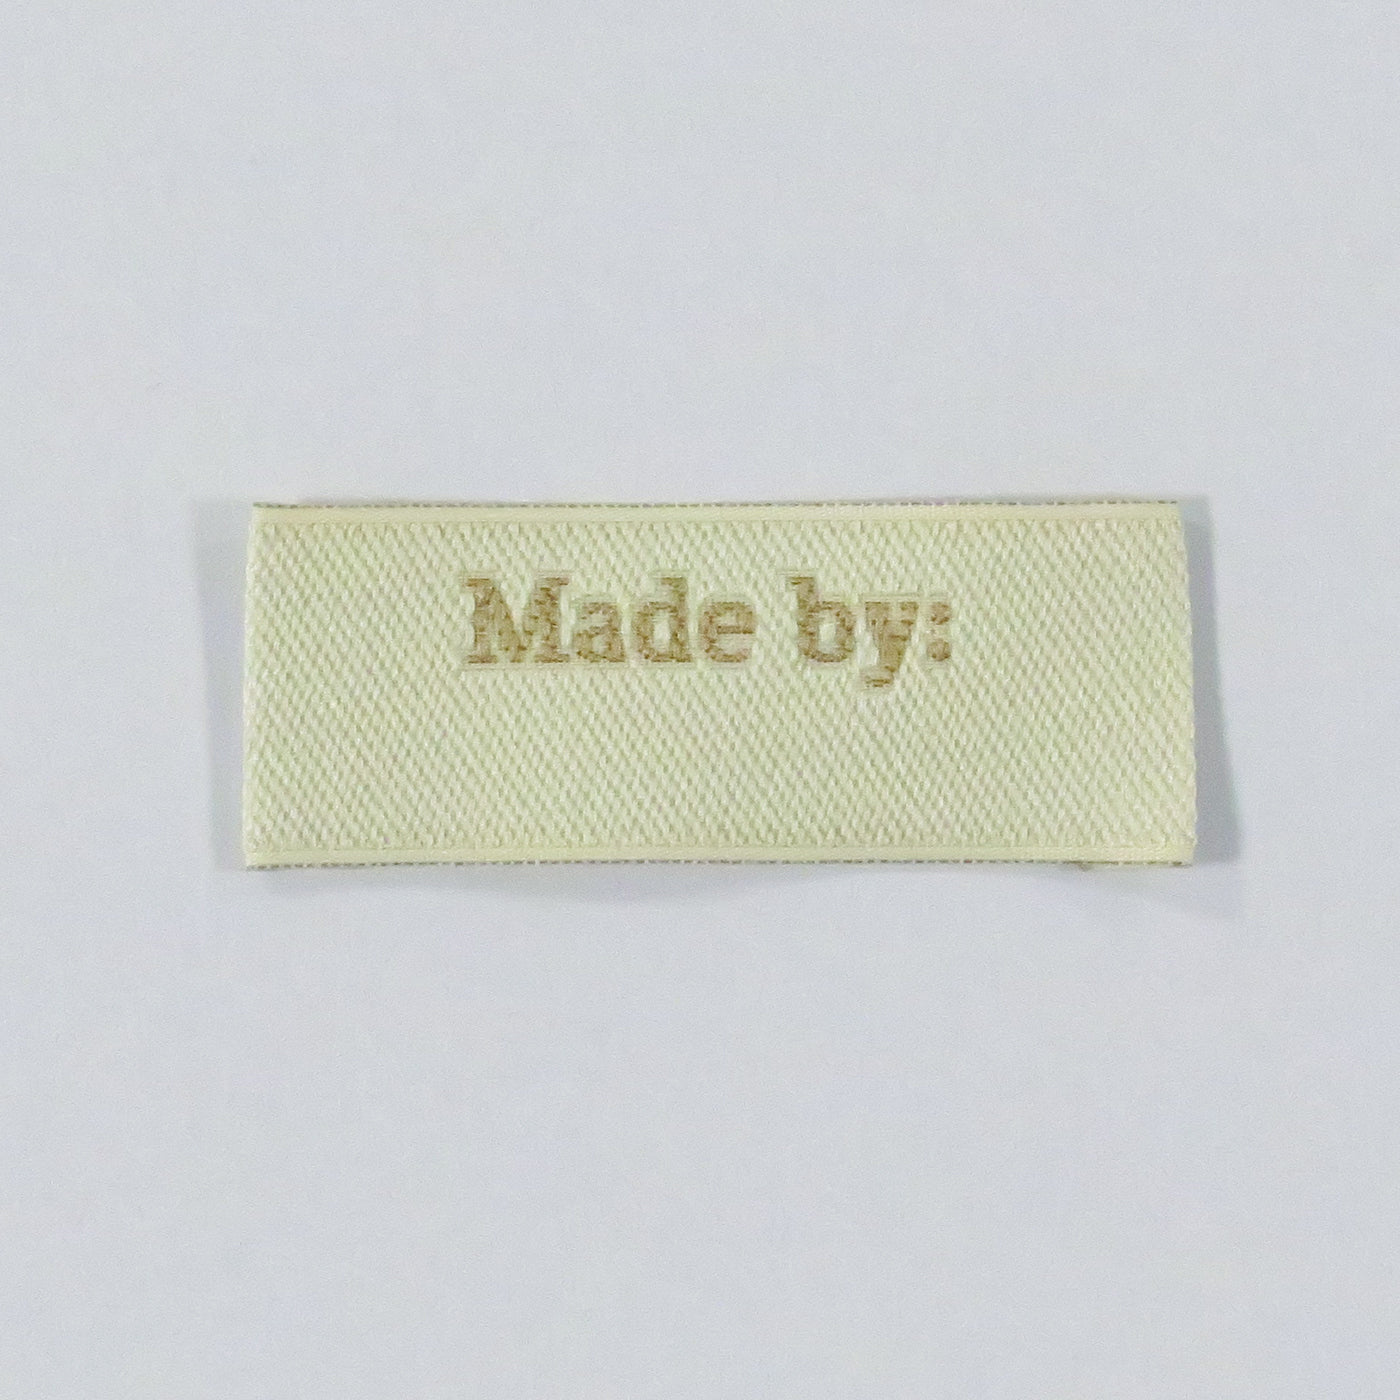 Label Made By: